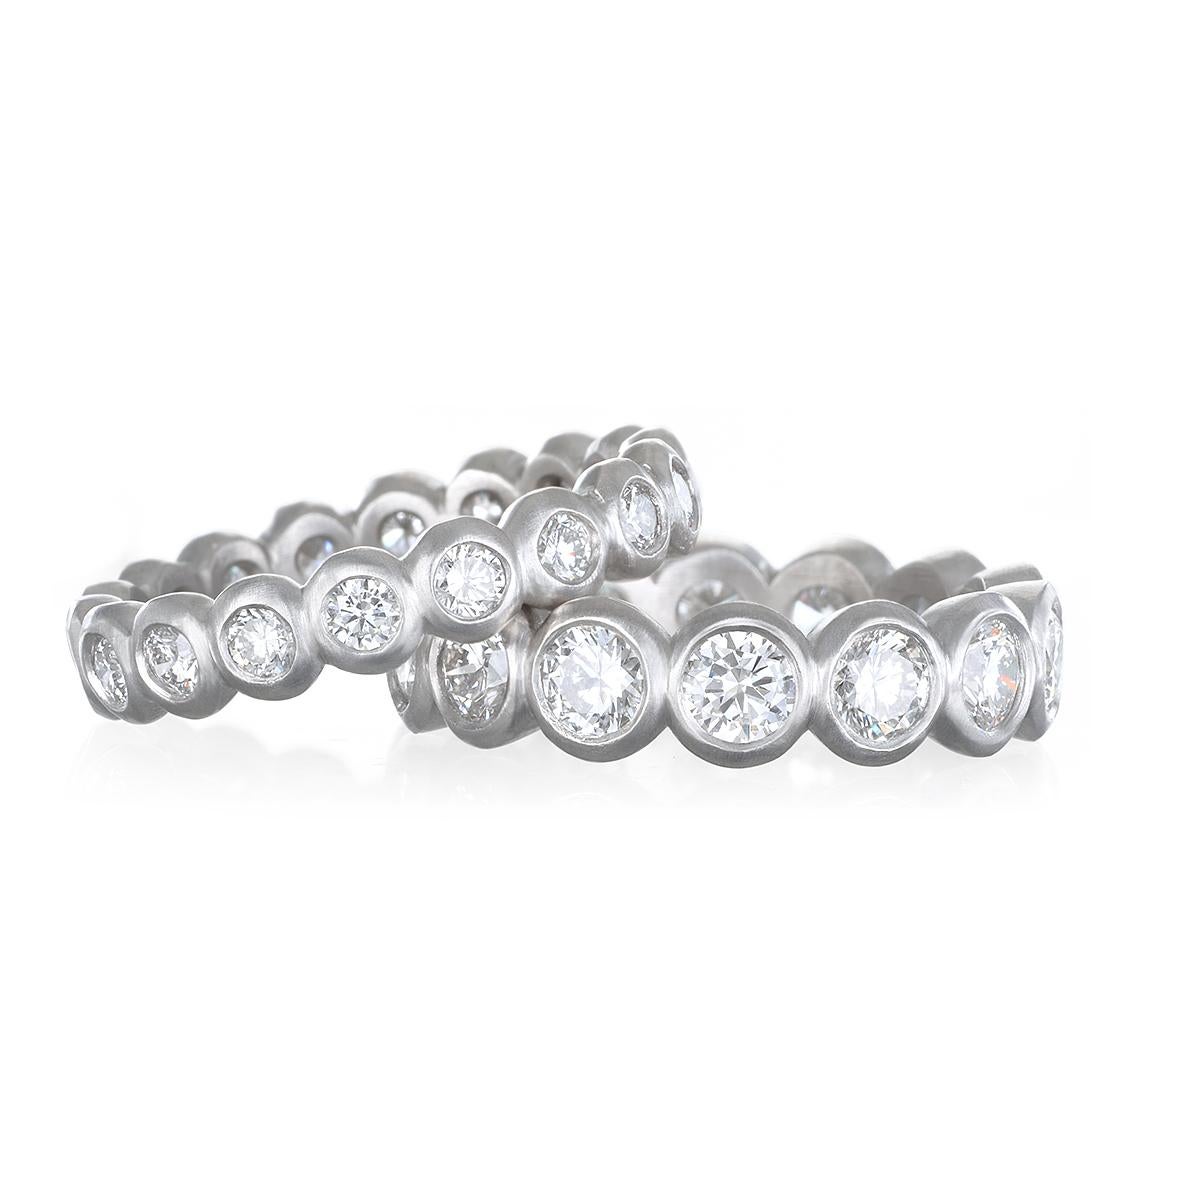 A classic beauty! Timeless and wearable, Faye Kim's Platinum Diamond Bezel Eternity ring is big, bold, and beautiful - the perfect band ring to wear alone or stack to create your own unique style.
Size 7.5
14 Diamonds  = 3.41 Carats Total Weight
F/G